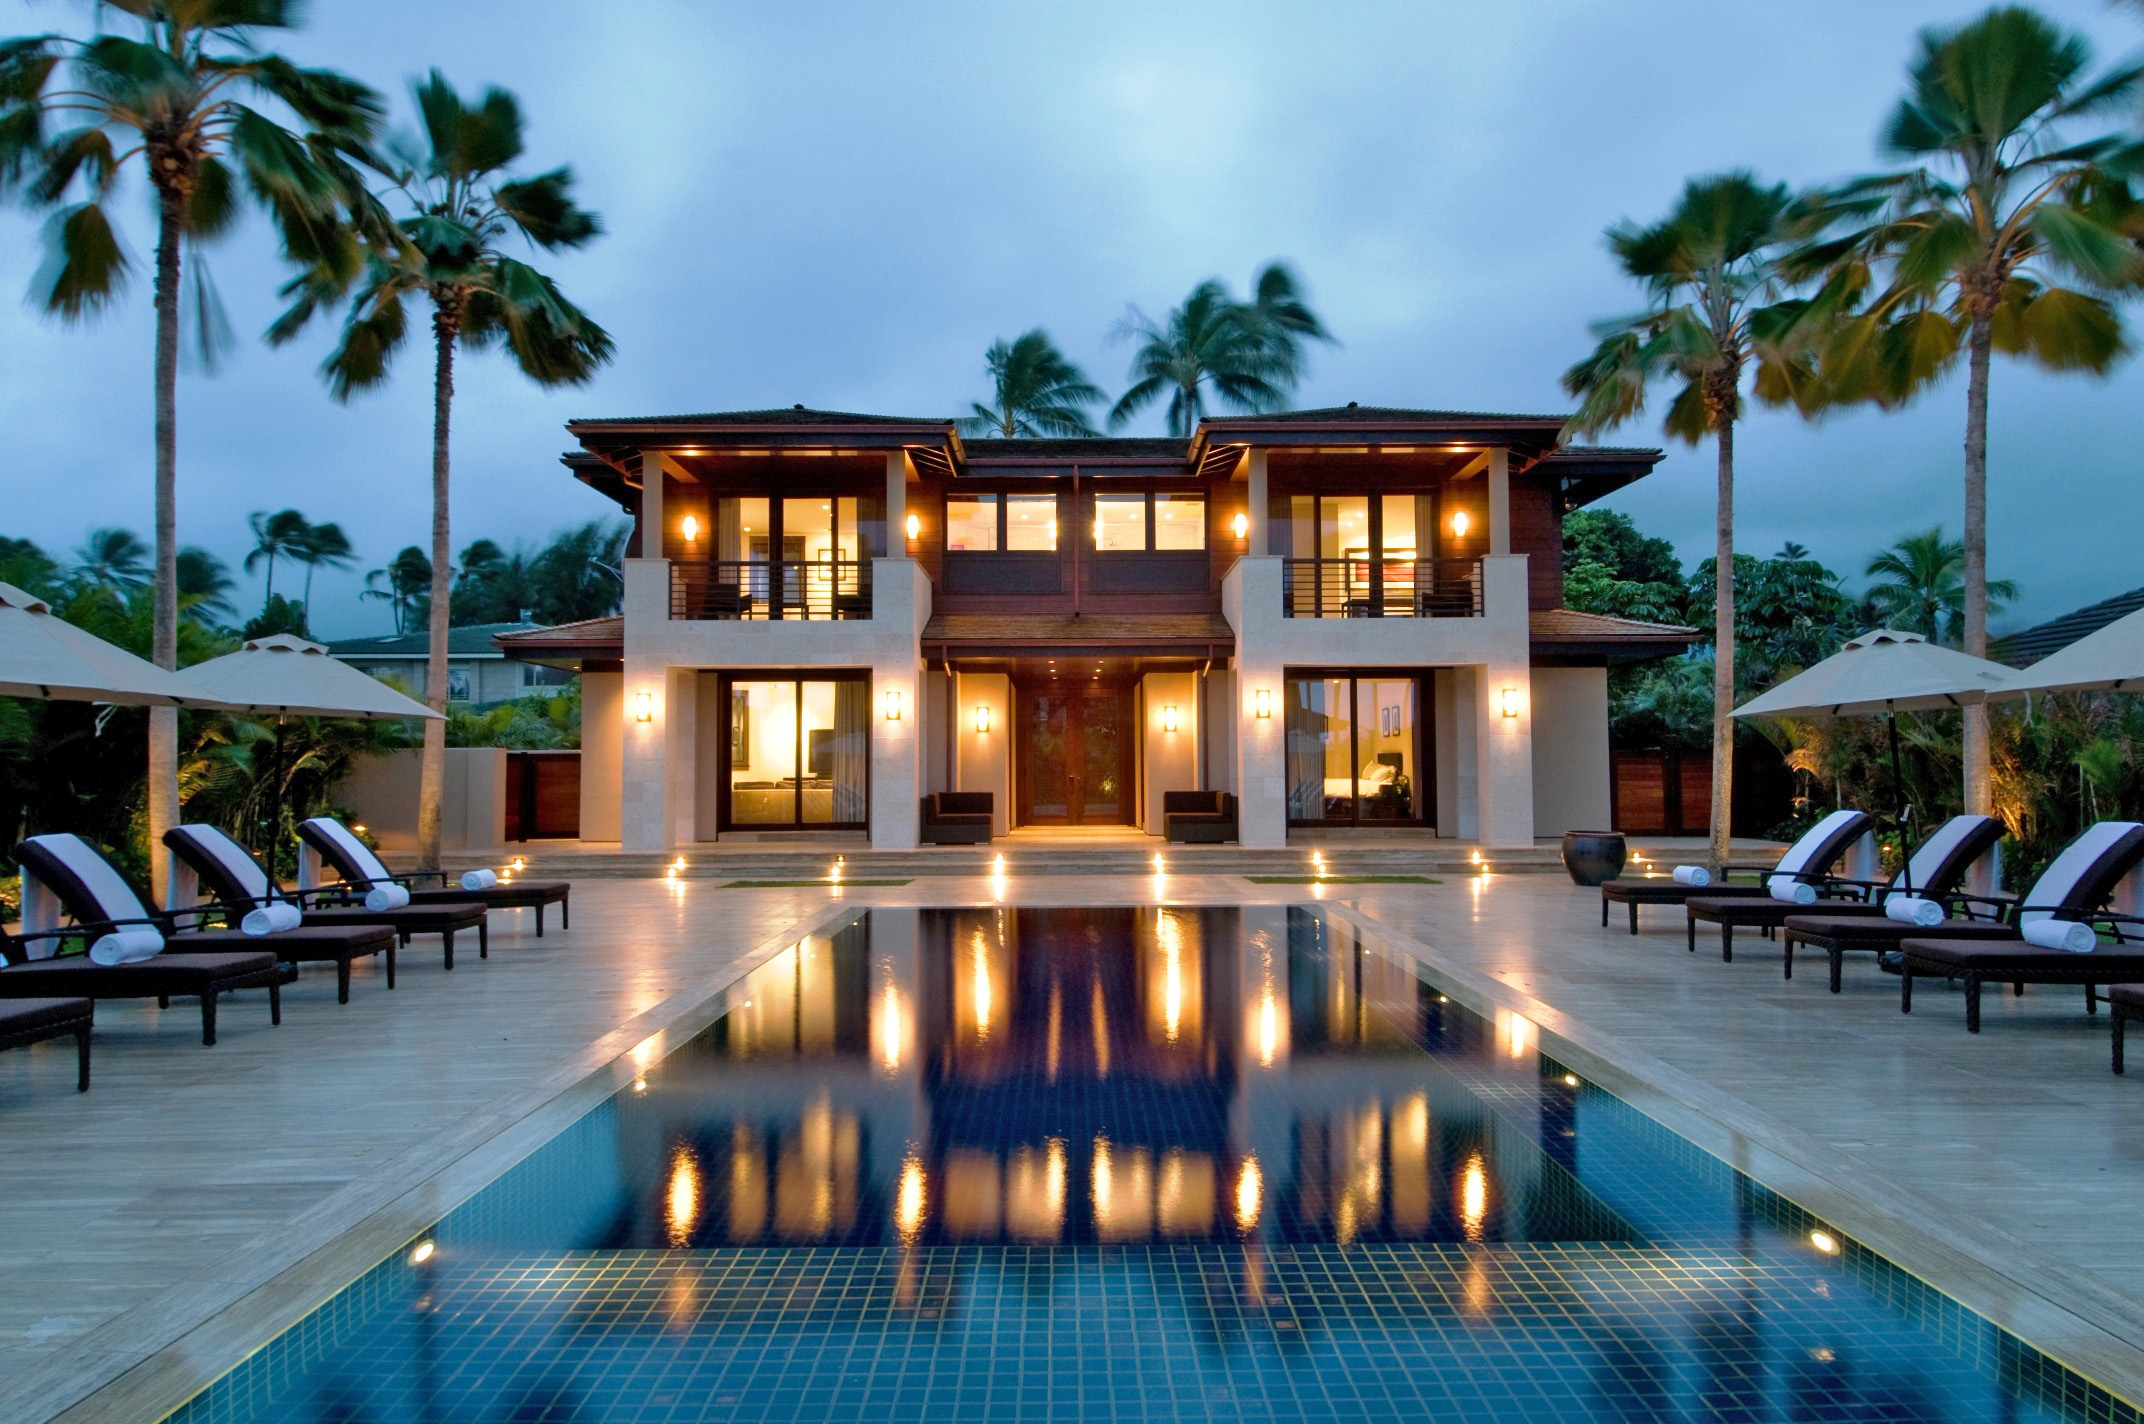 The benefits of Staying in a Vacation Villa